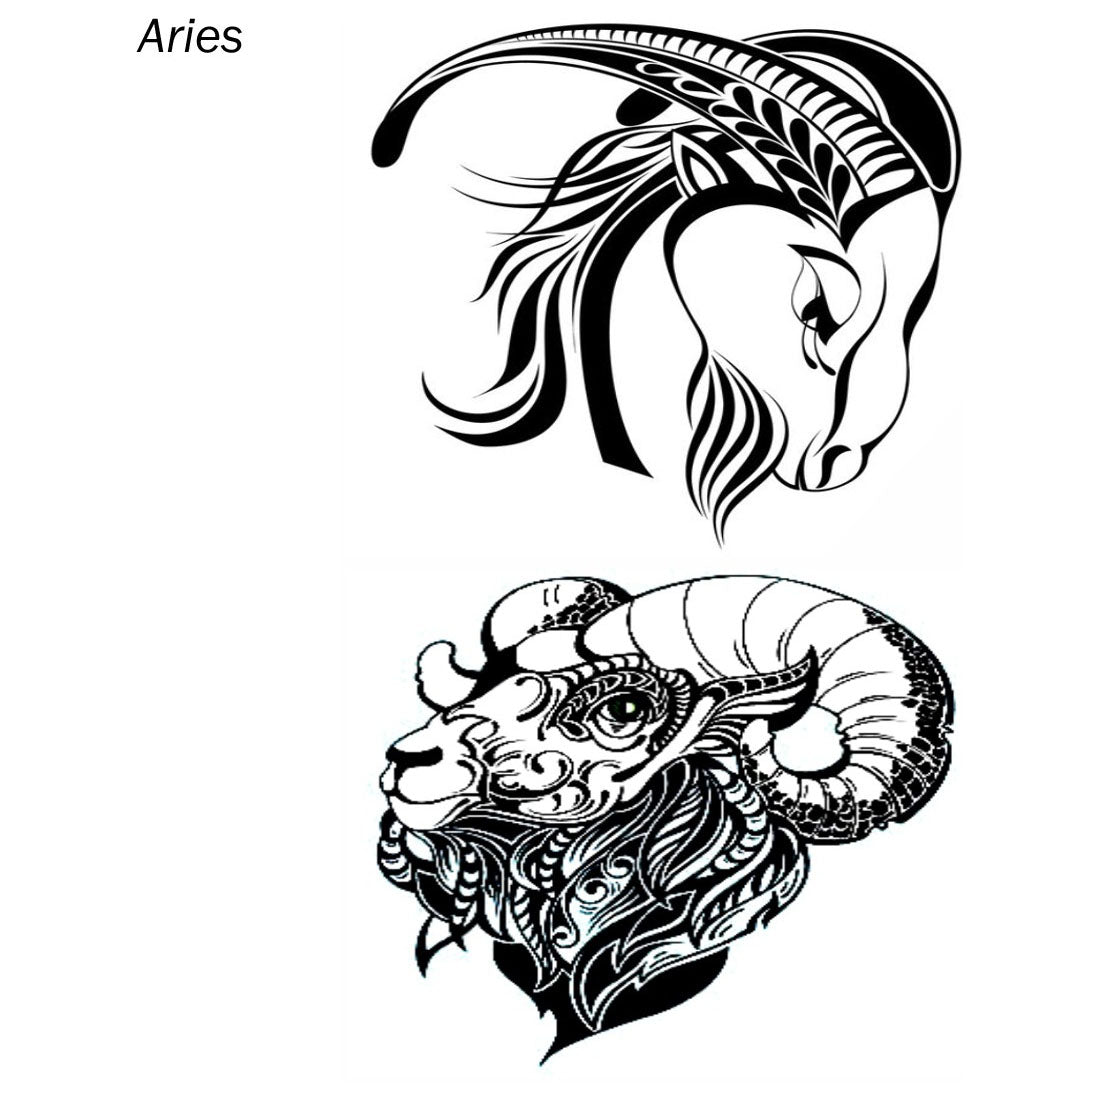 The Best Tattoo Designs To Get, According To Your Zodiac Sign | Preview.ph